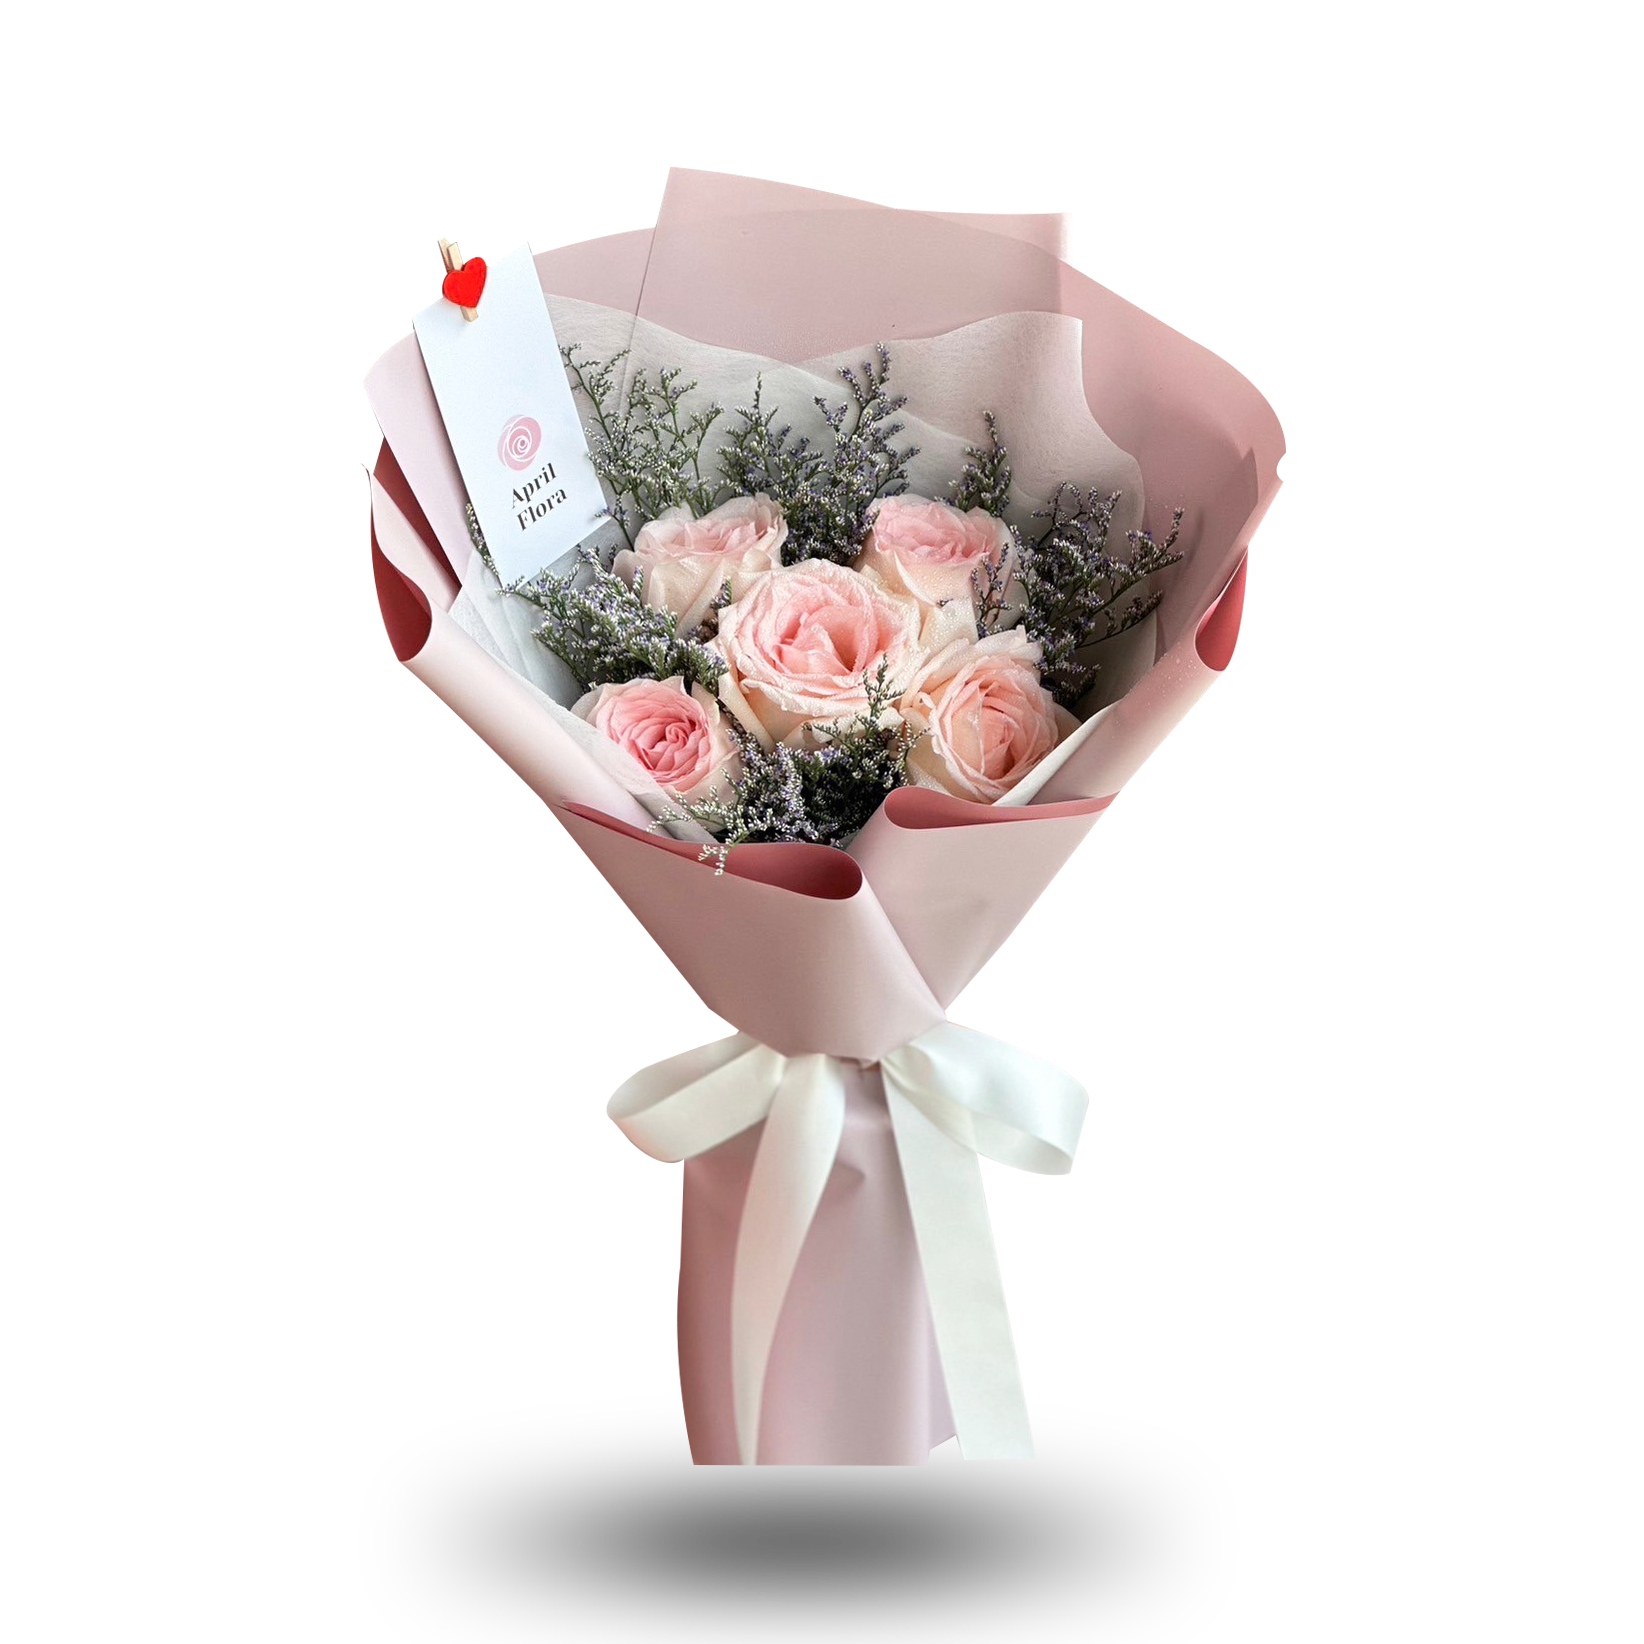 "My darling" bouquet of 5 pink roses - Phuket